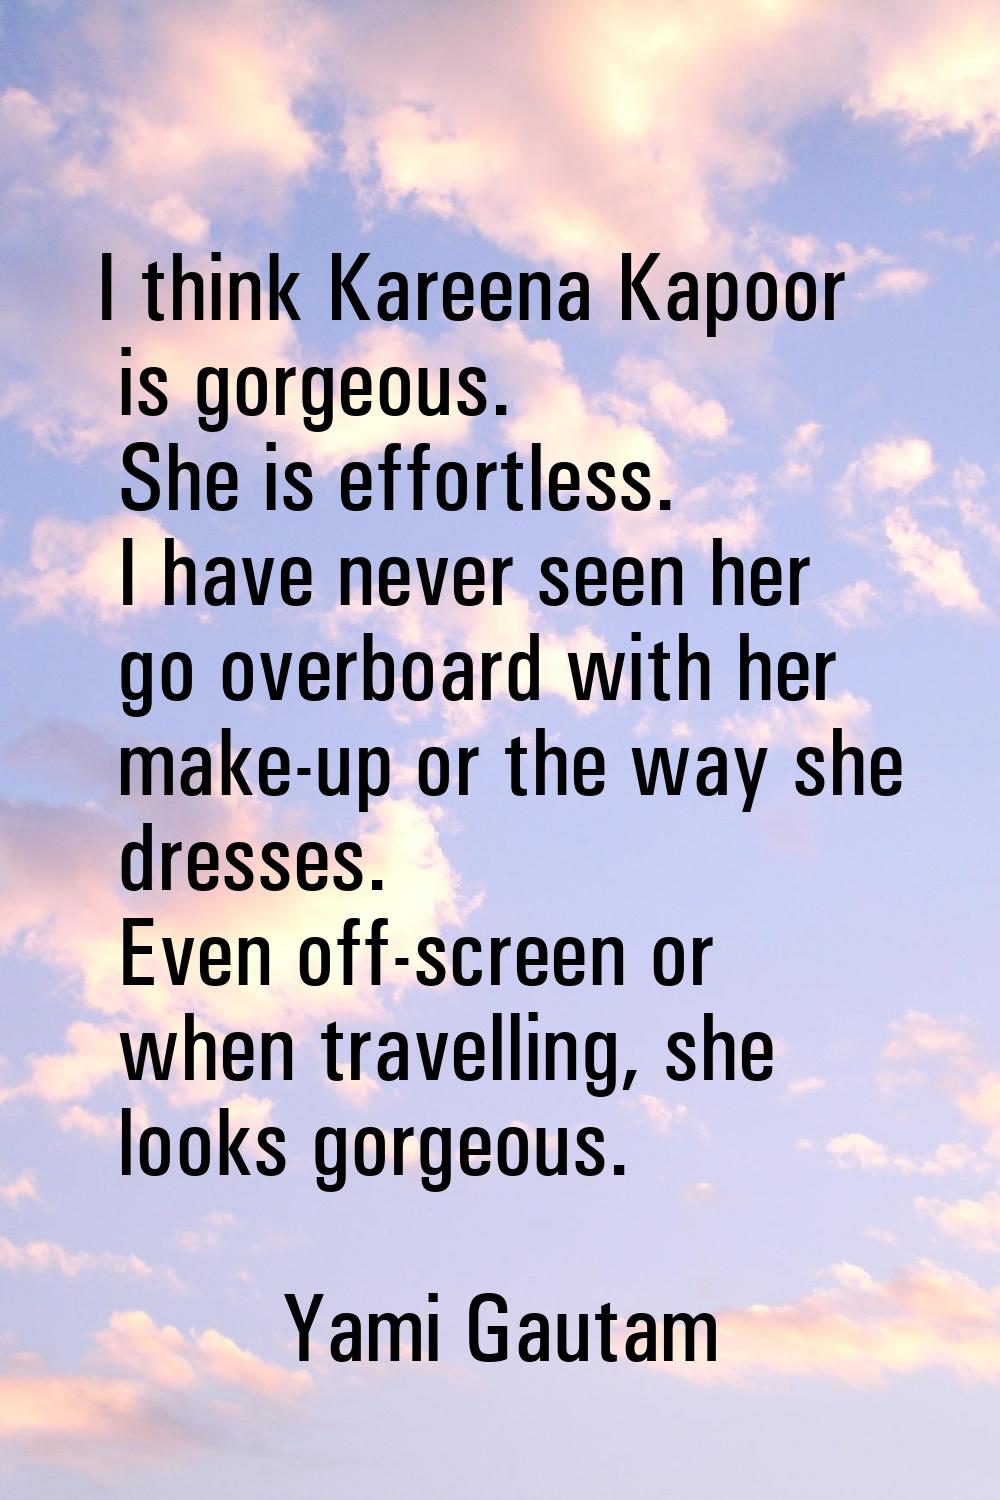 I think Kareena Kapoor is gorgeous. She is effortless. I have never seen her go overboard with her 